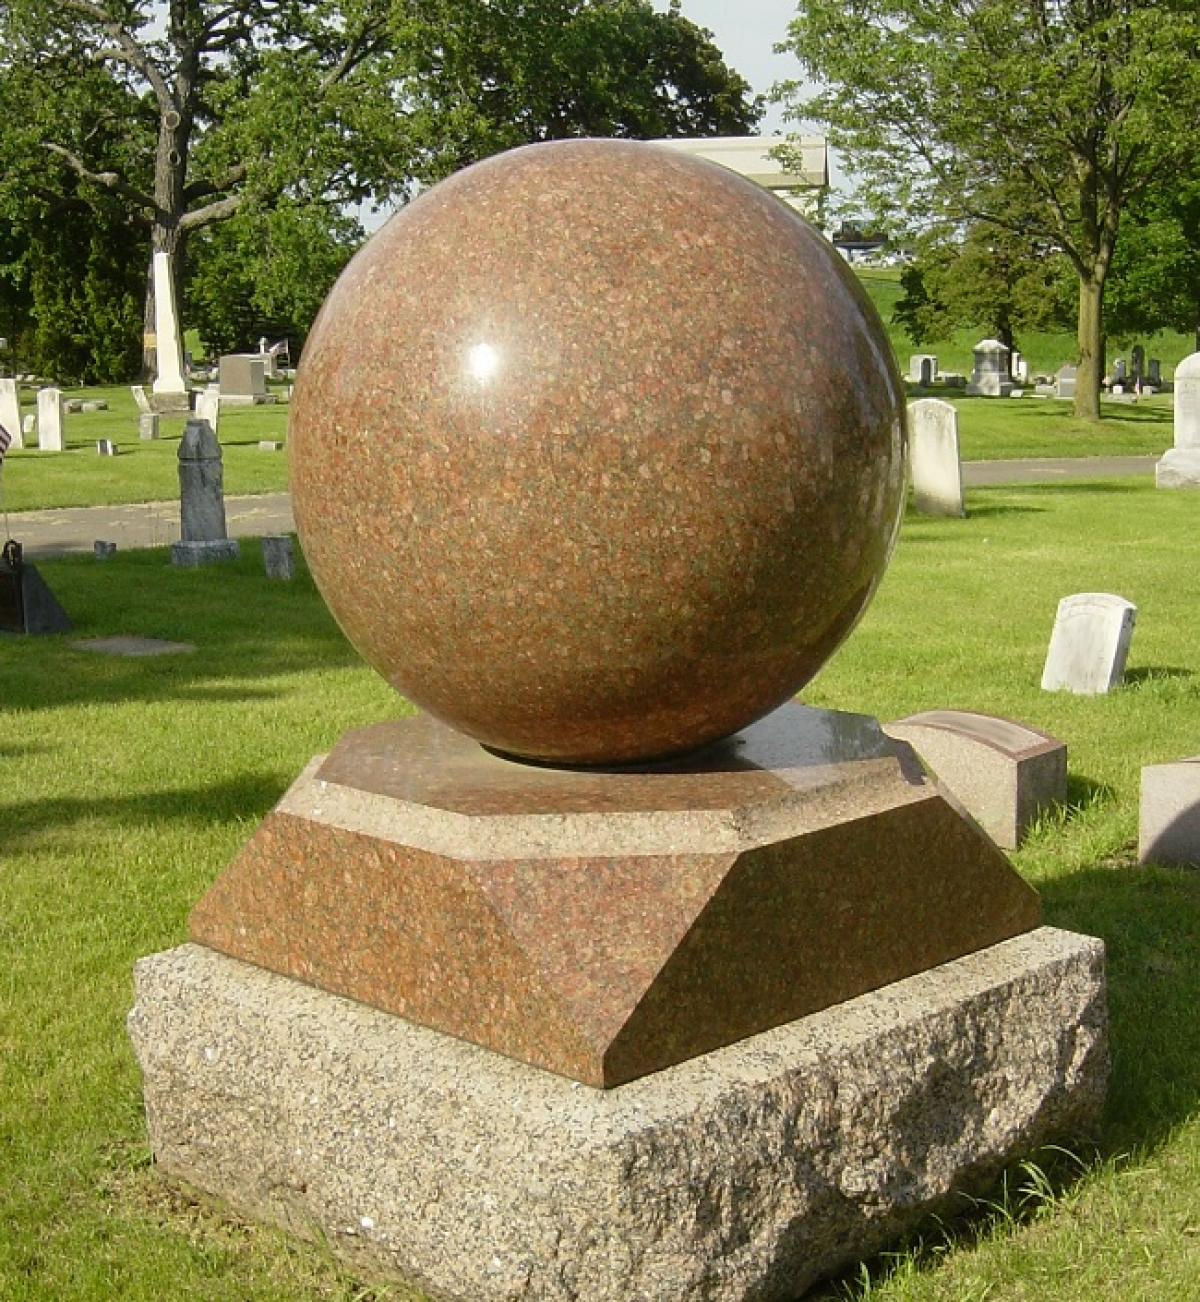 OK, Grove, Headstone Symbols and Meanings, Orb